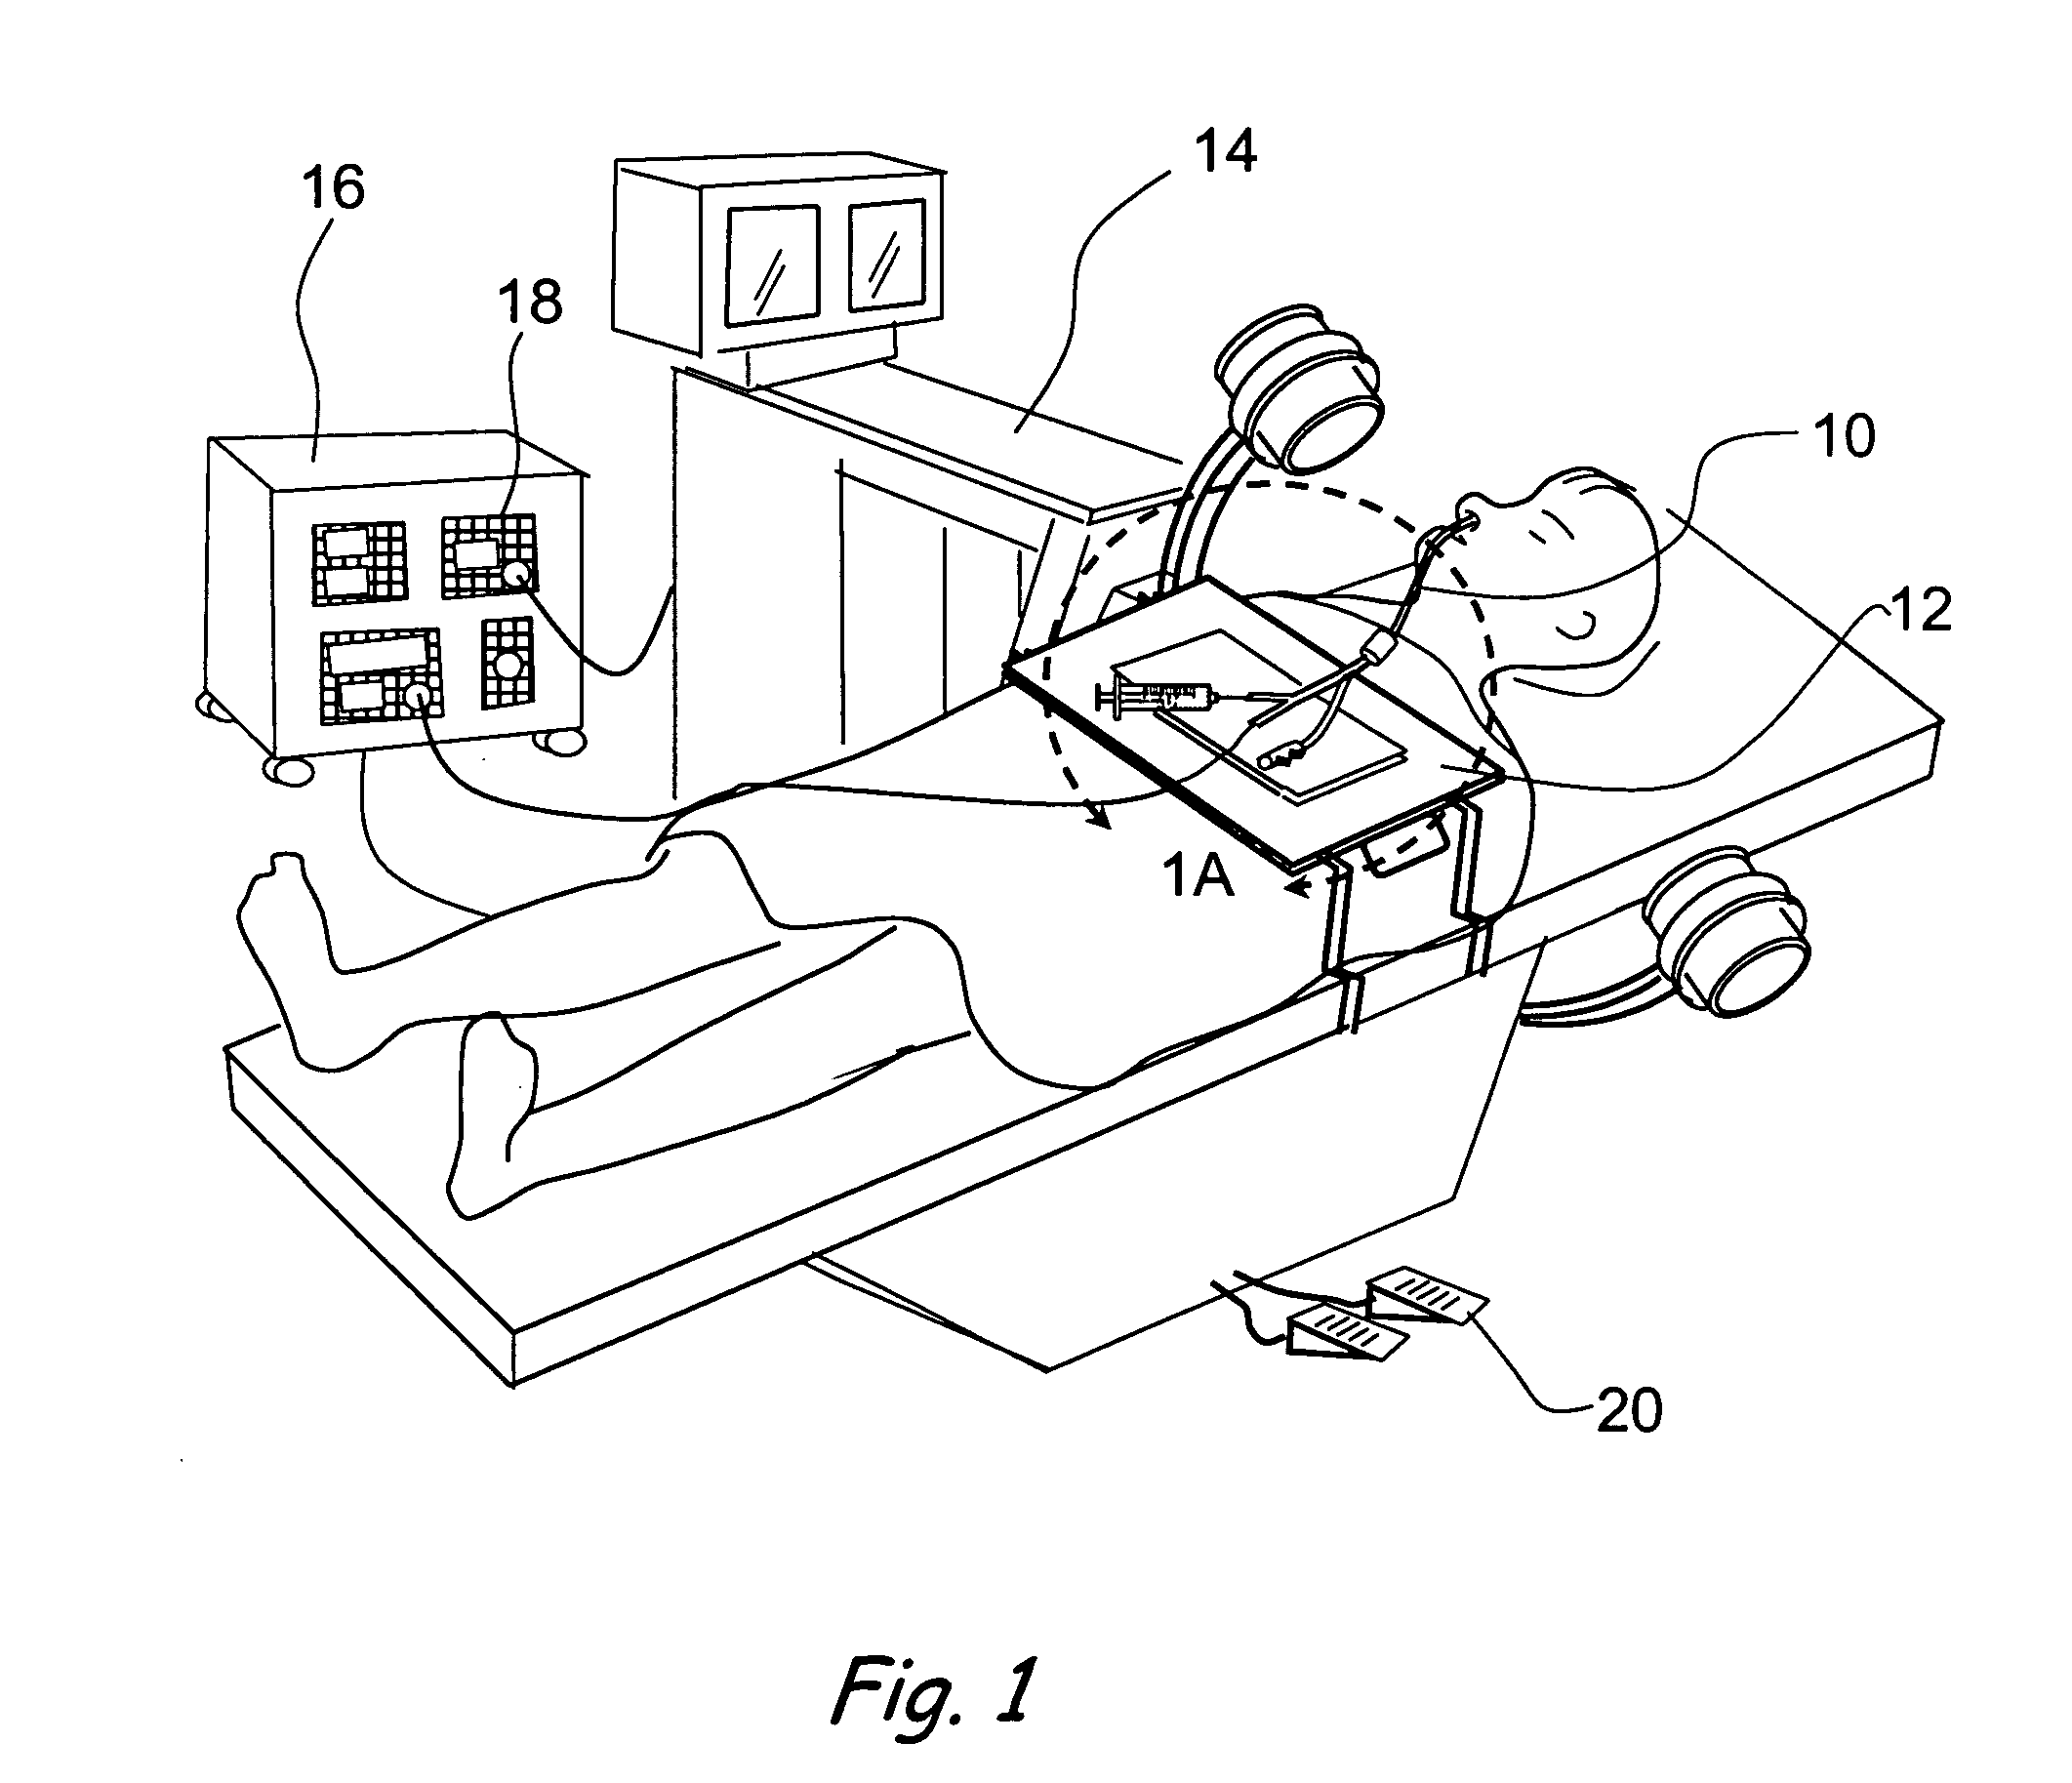 Devices, systems and methods for treating disorders of the ear, nose and throat